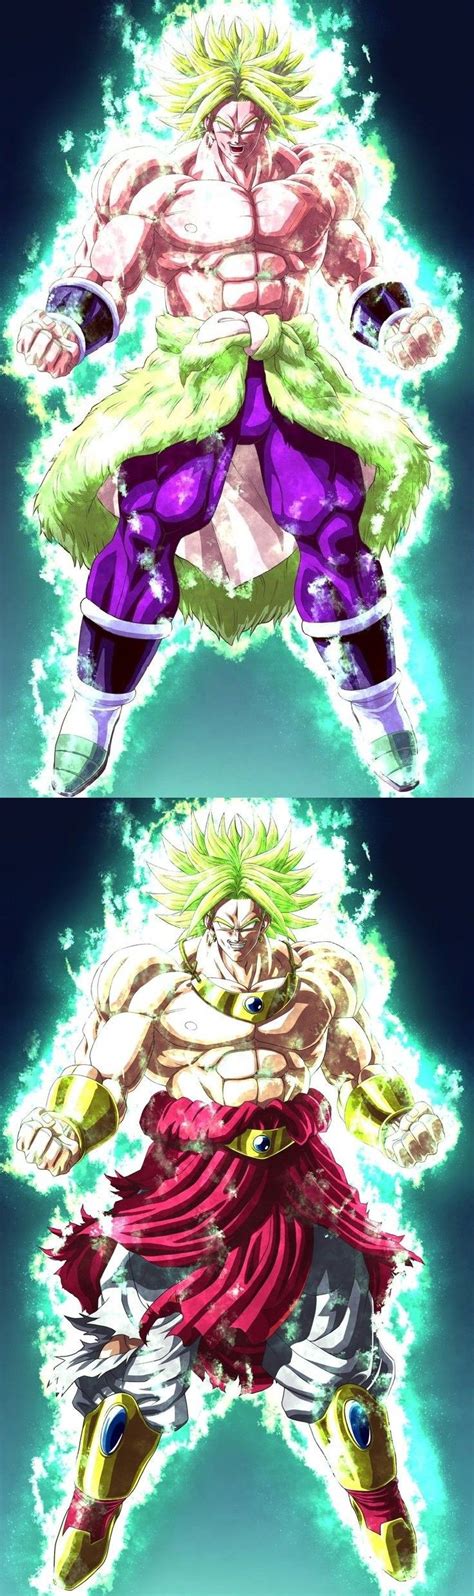 Do not miss your chance to see dragon ball super: Broly 2018 | Broly 1993 | Dbz wallpapers, Anime